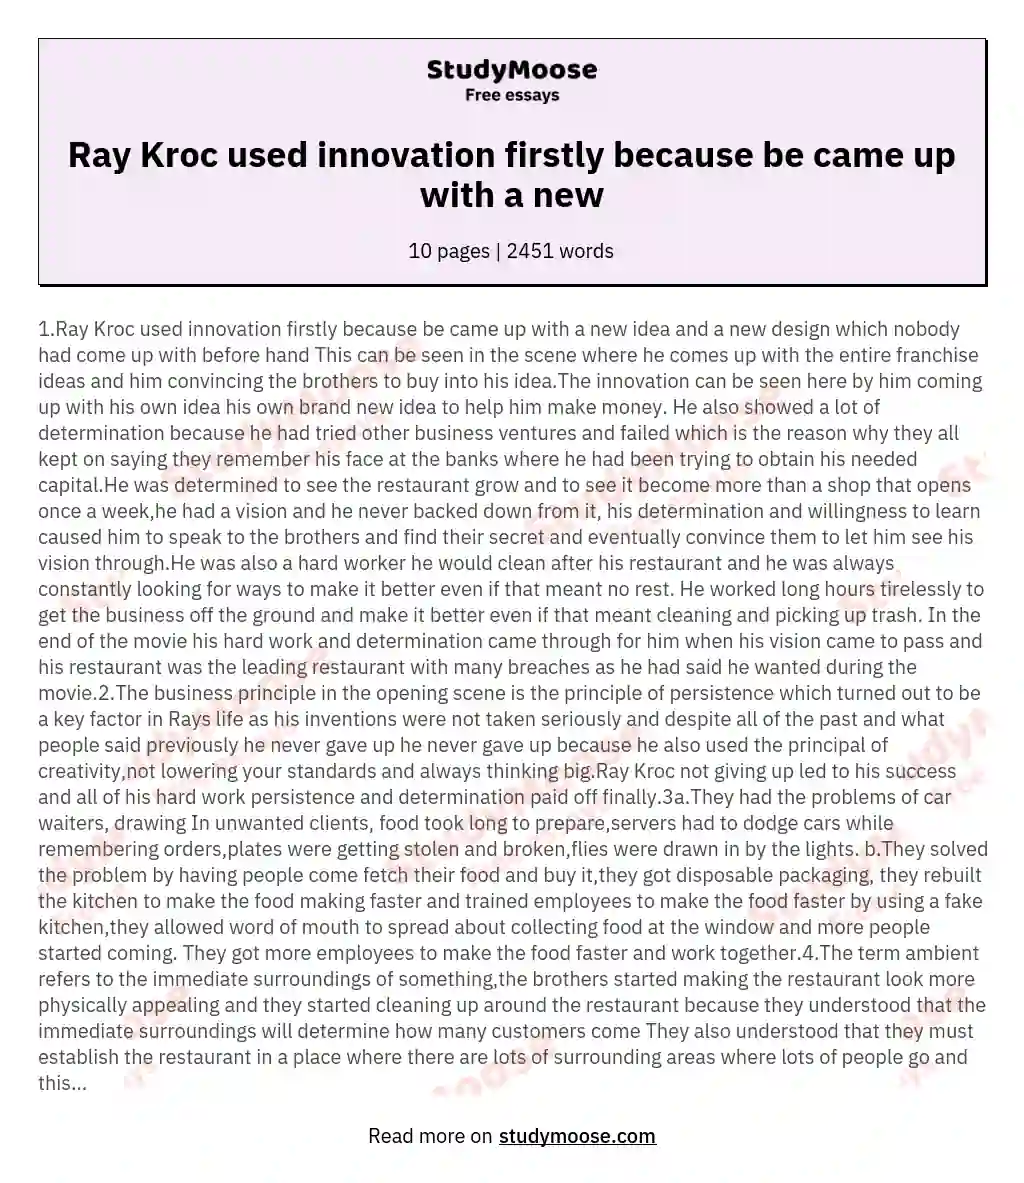 Ray Kroc used innovation firstly because be came up with a new